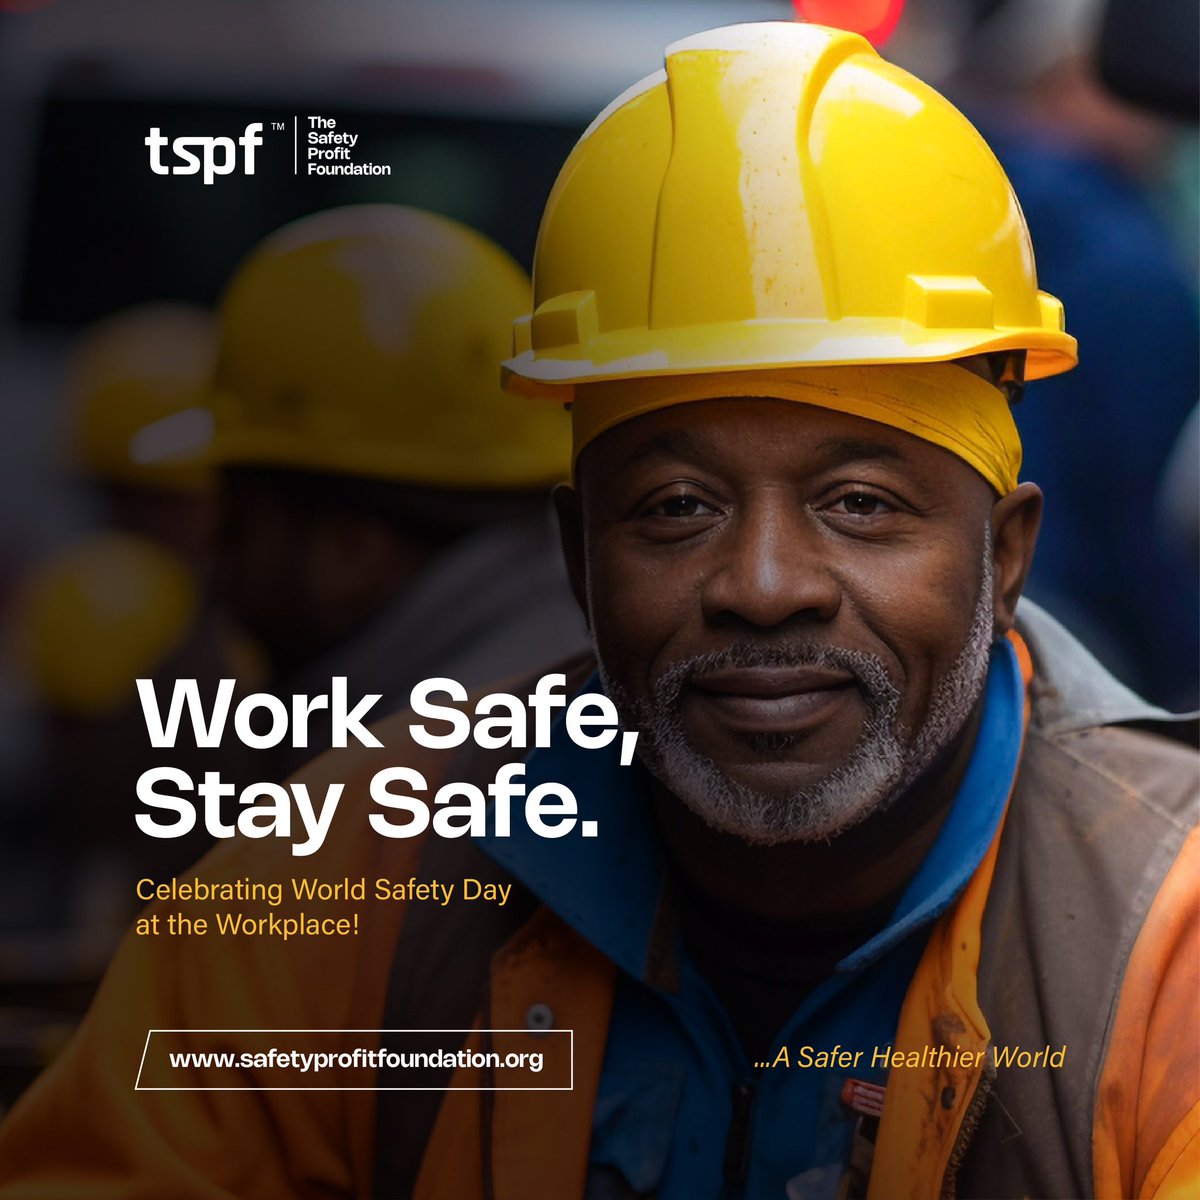 Happy World Safety Day! Today, we shed light on the critical intersection of climate change and safety. As we witness the profound impact of climate change on our environment, we're reminded of its ripple effects on safety in every aspect of our lives. #WorldSafetyDay #tspf